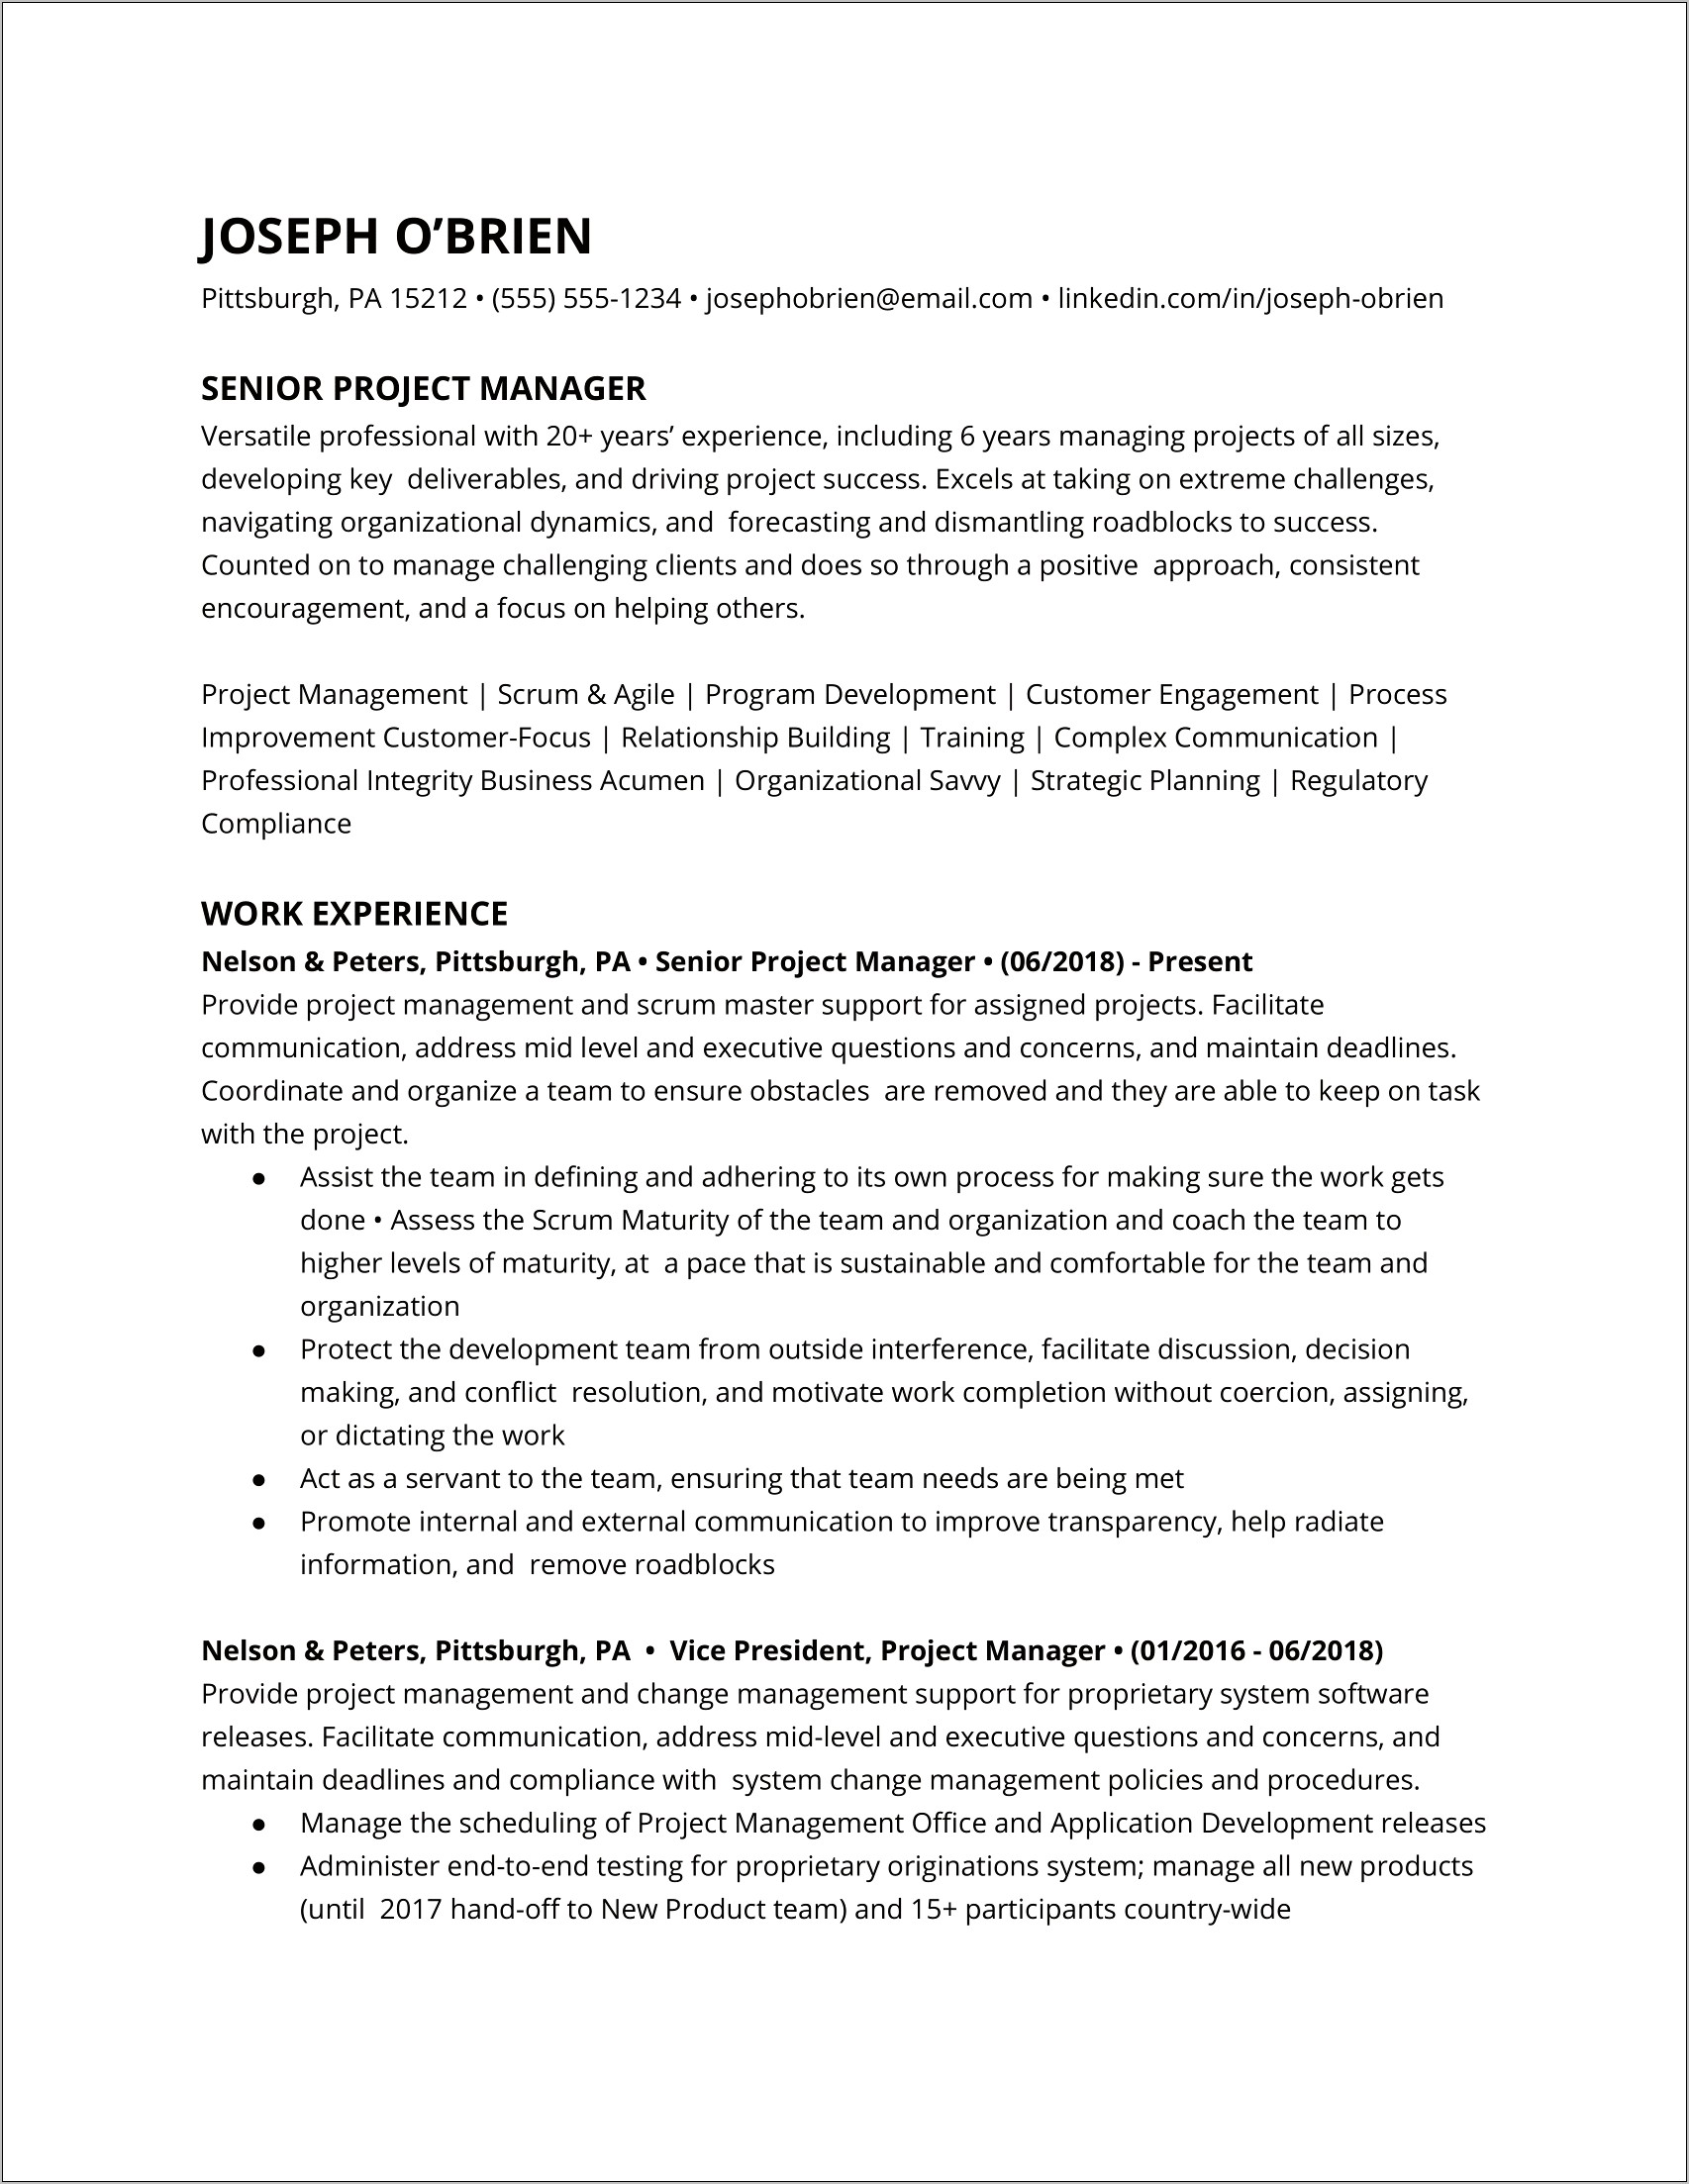 Academic Projects Examples For Resume